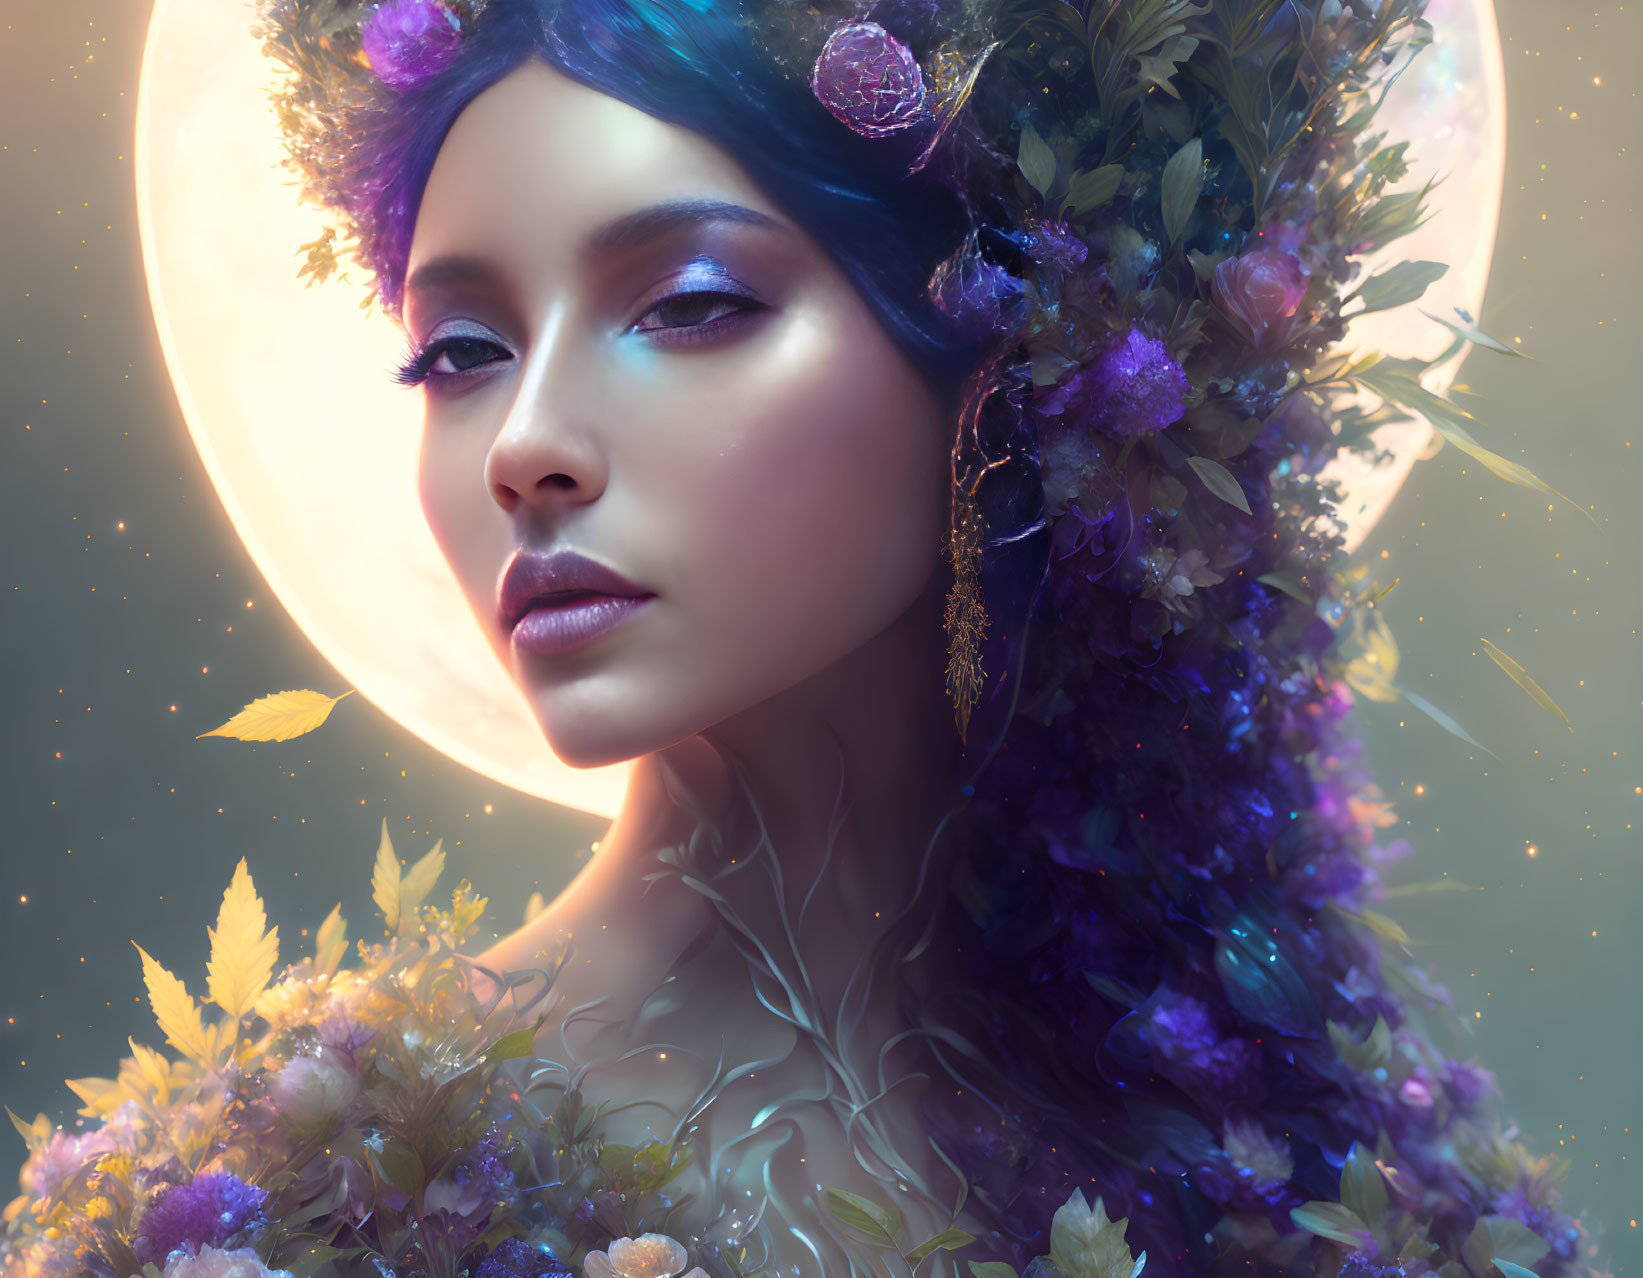 Person adorned with floral elements under glowing full moon.